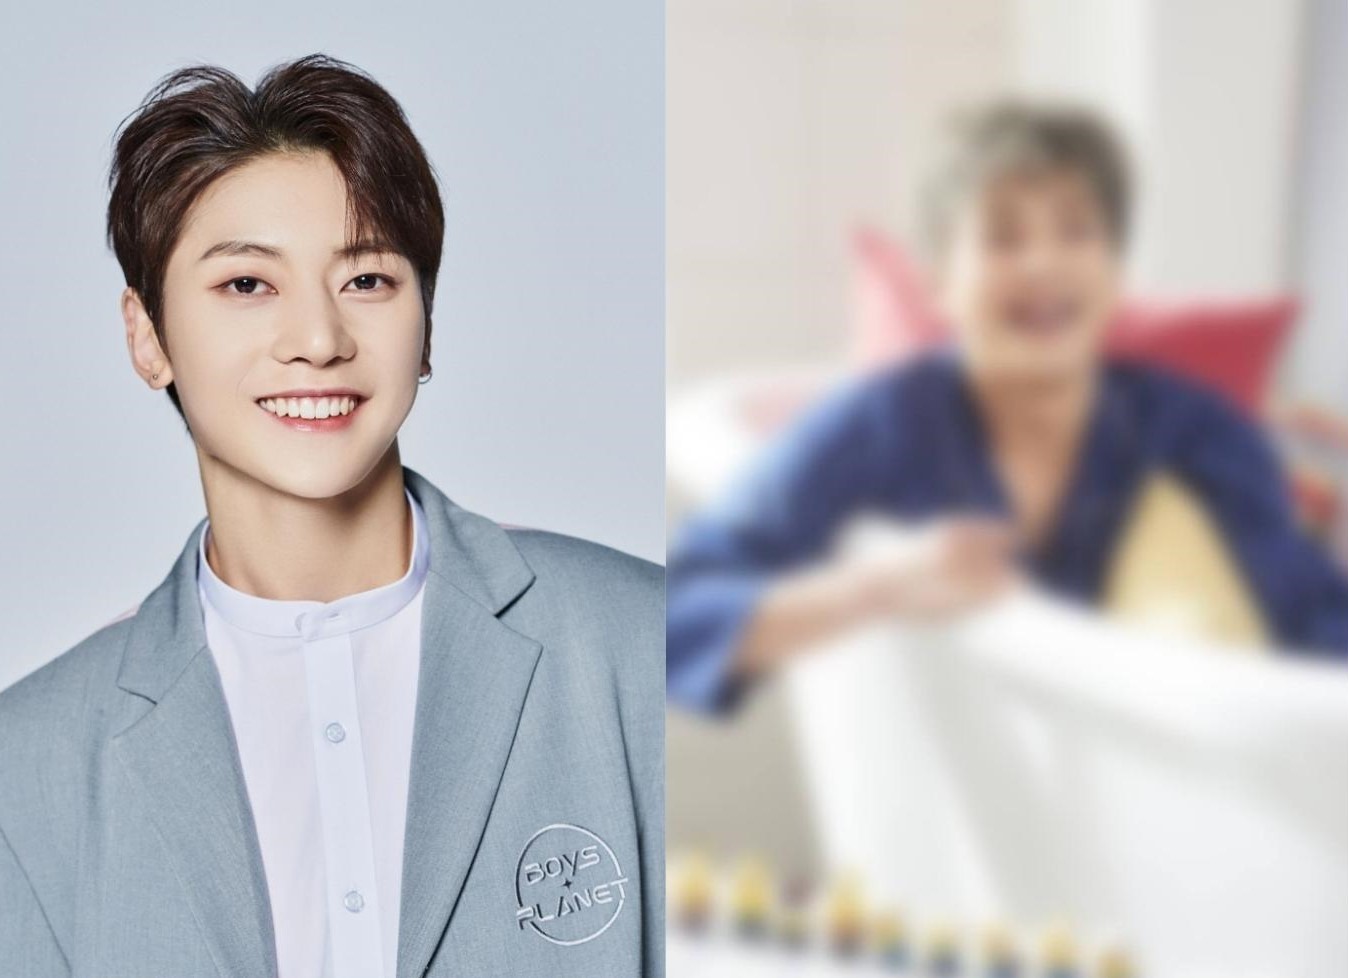 Boys Planet contestant Seok Matthew looks exactly like this EXO member – don’t you agree?